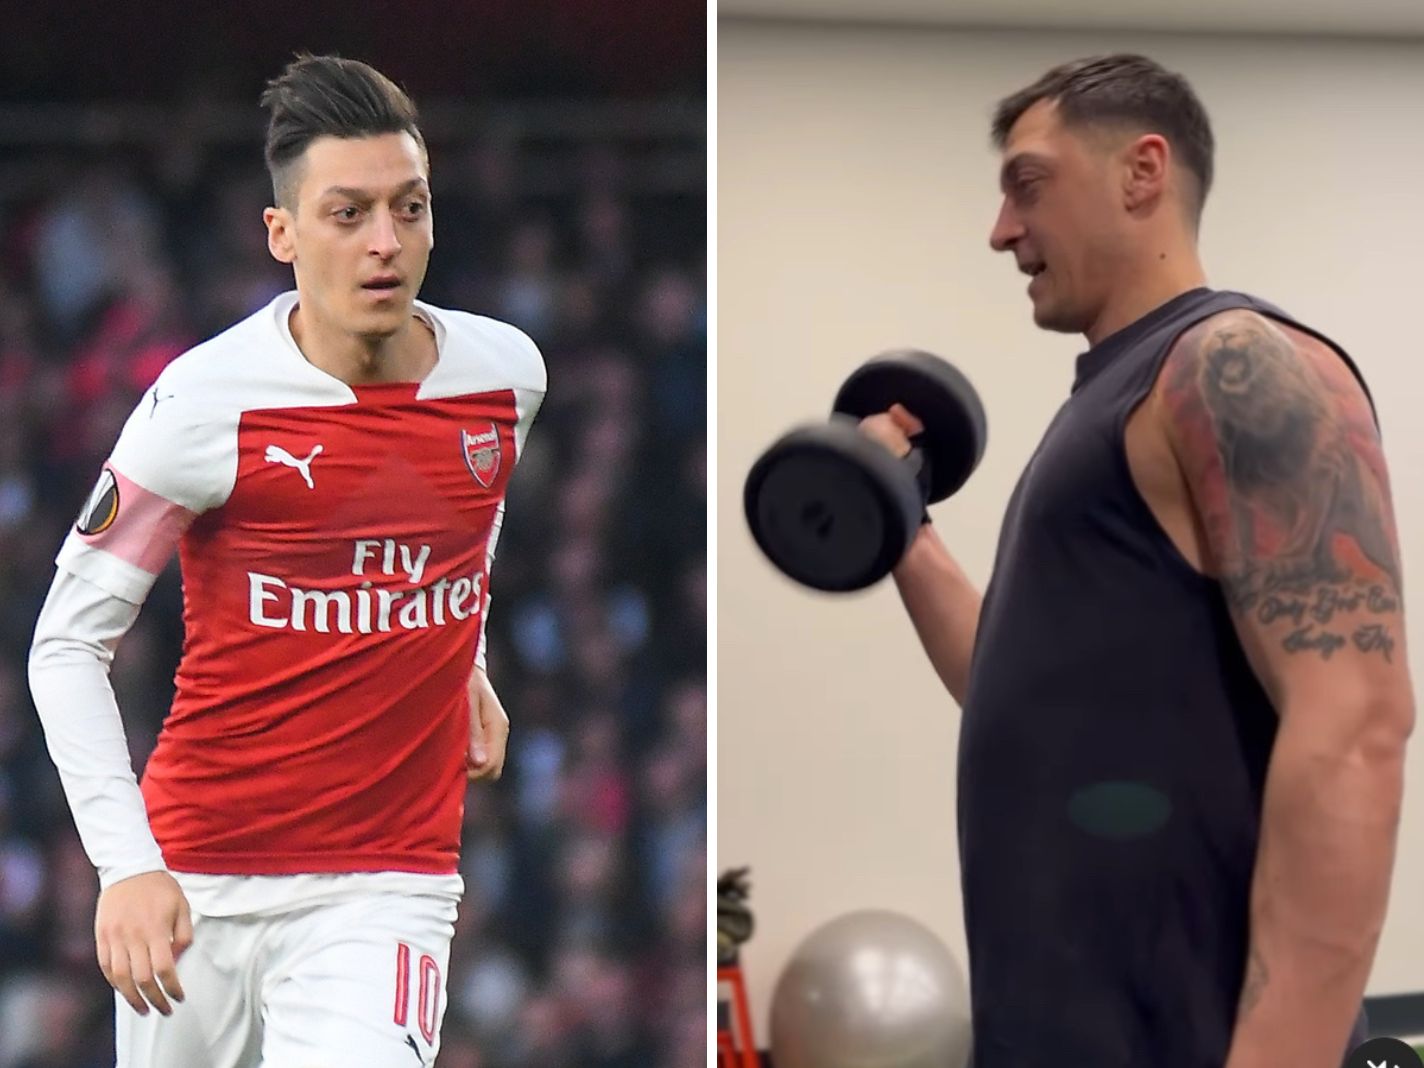 Mesut Ozil’s Physical Transformation Post Retirement Will Leave You Speechless: See Before and After Pics